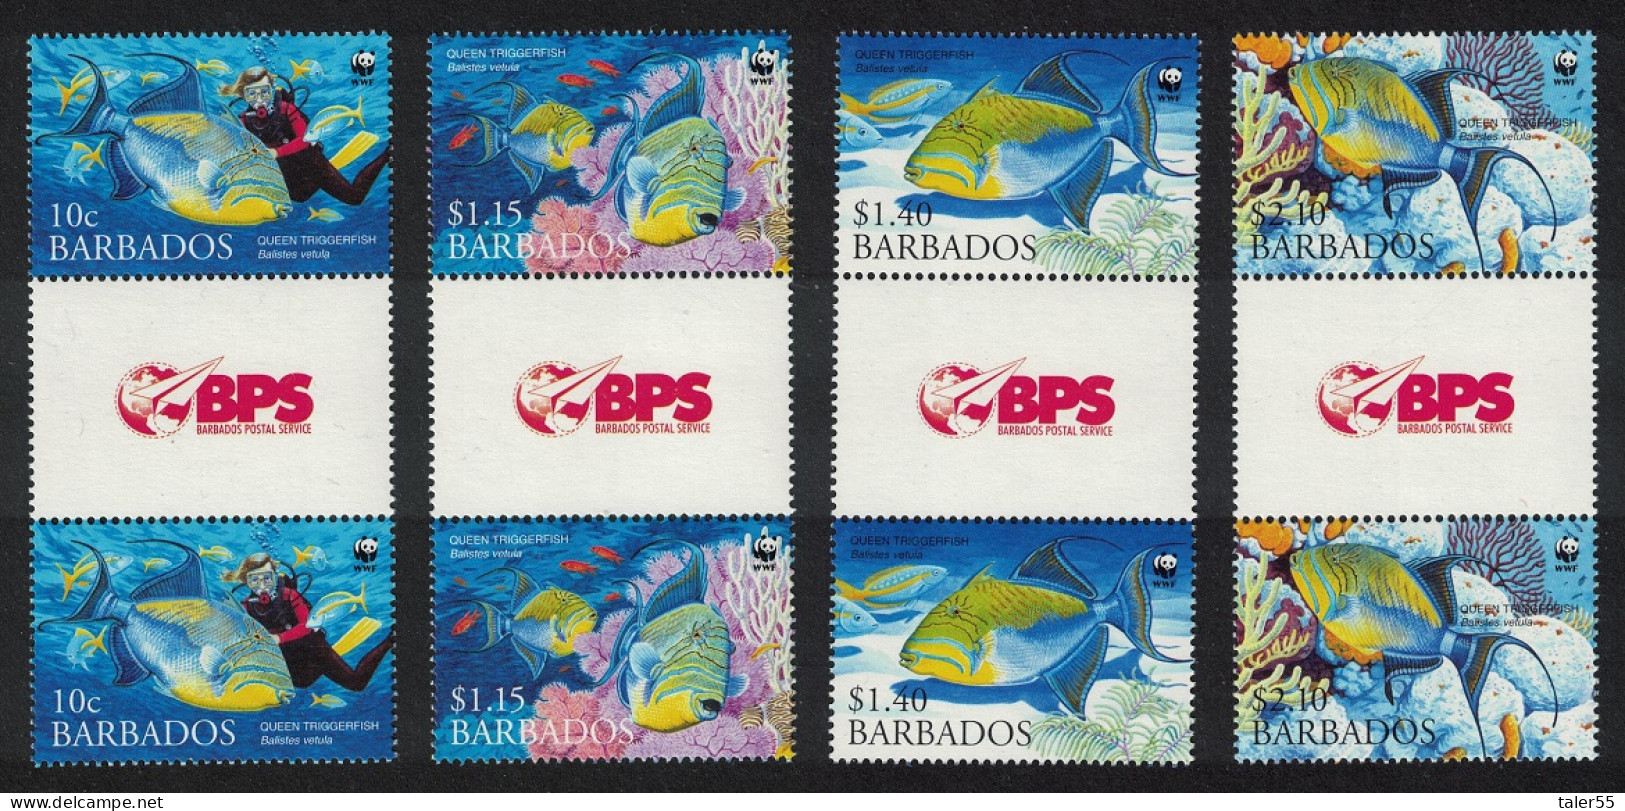 Barbados WWF Queen Triggerfish Diving Fish 4 Gutter Pairs 2006 MNH SG#1290-1293 MI#1119-1122 Sc#1102-1105 - Barbades (1966-...)